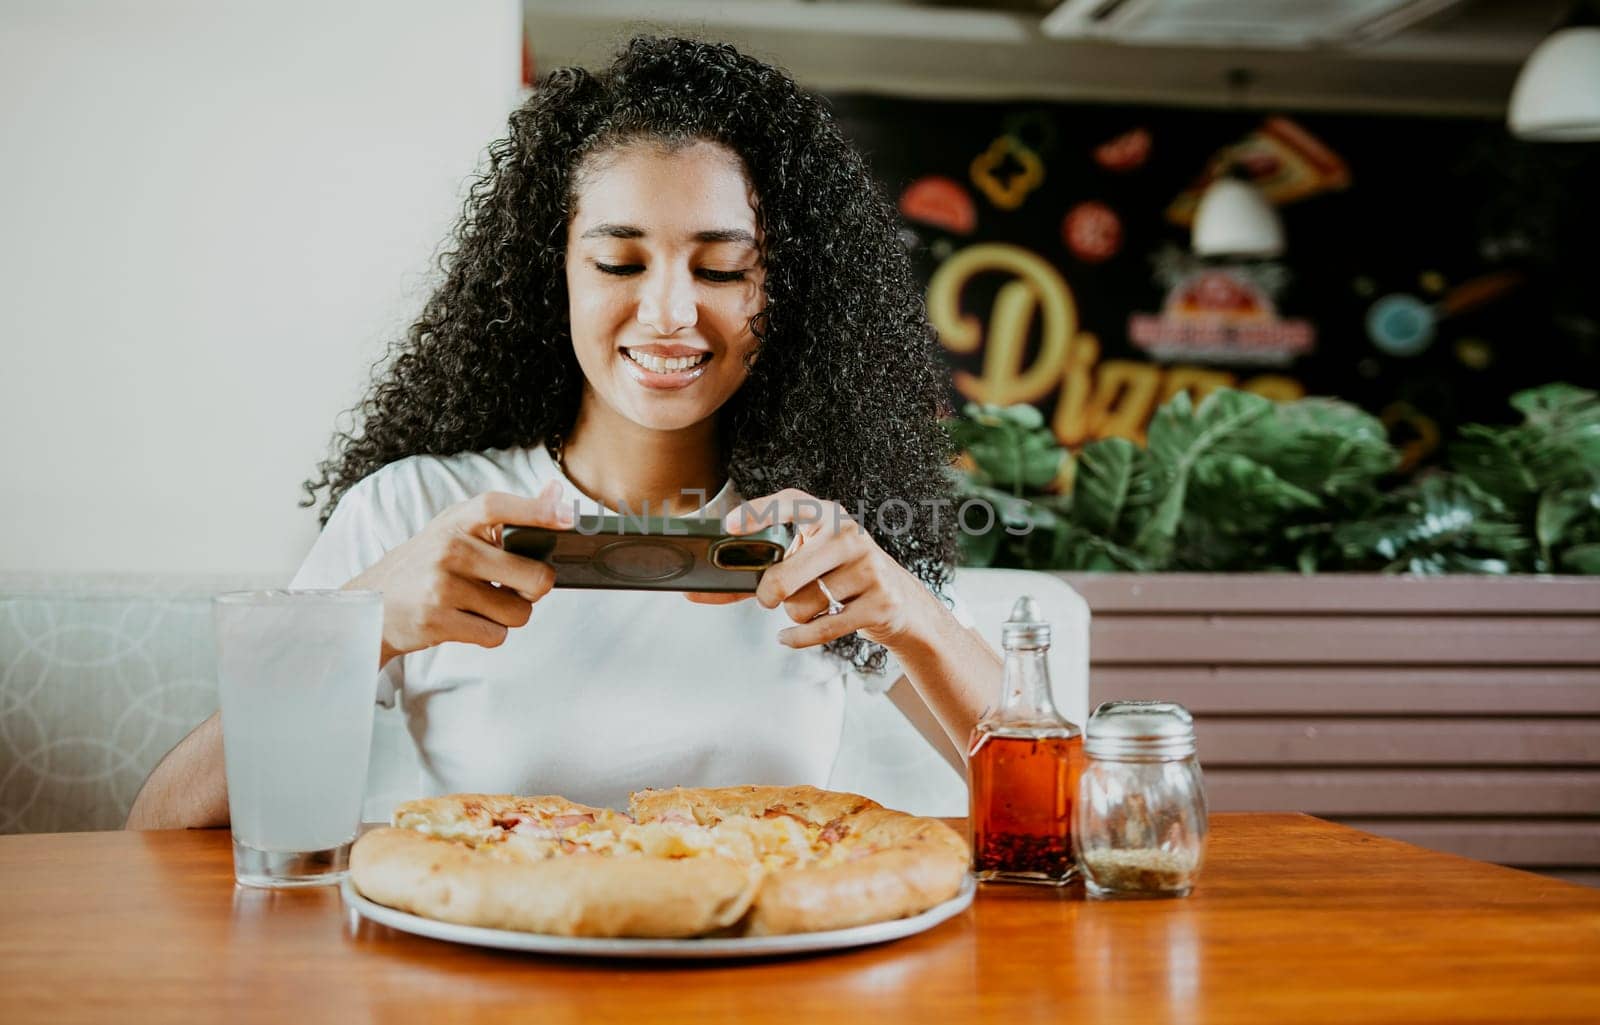 Smiling young woman using phone photographing a pizza in a restaurant. Happy girl photographing a pizza with the cell phone